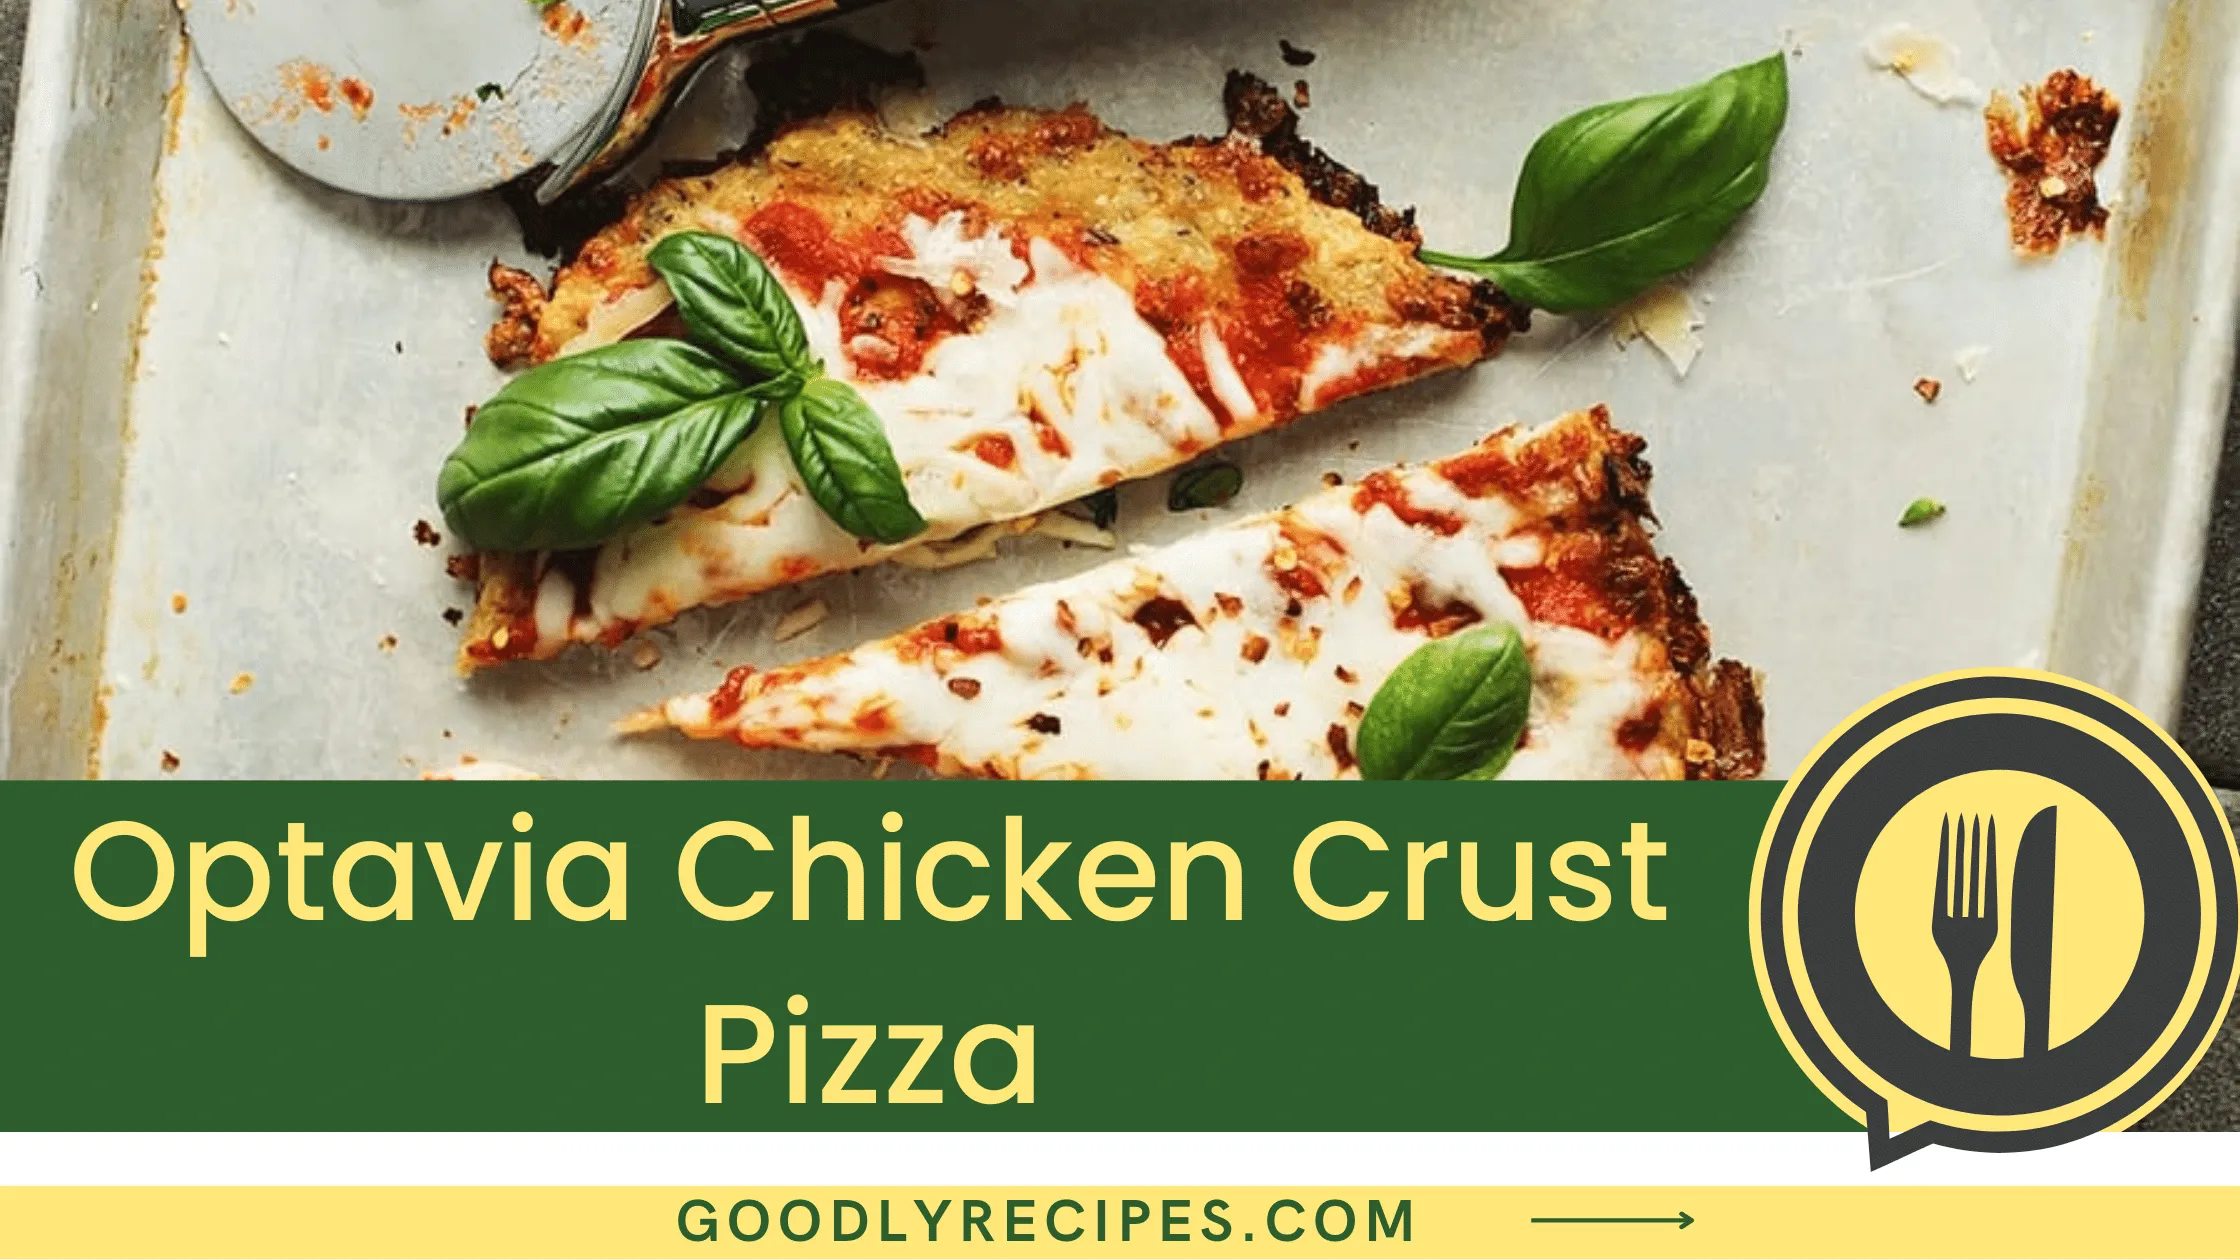 Optavia Chicken Crust Pizza - For Food Lovers